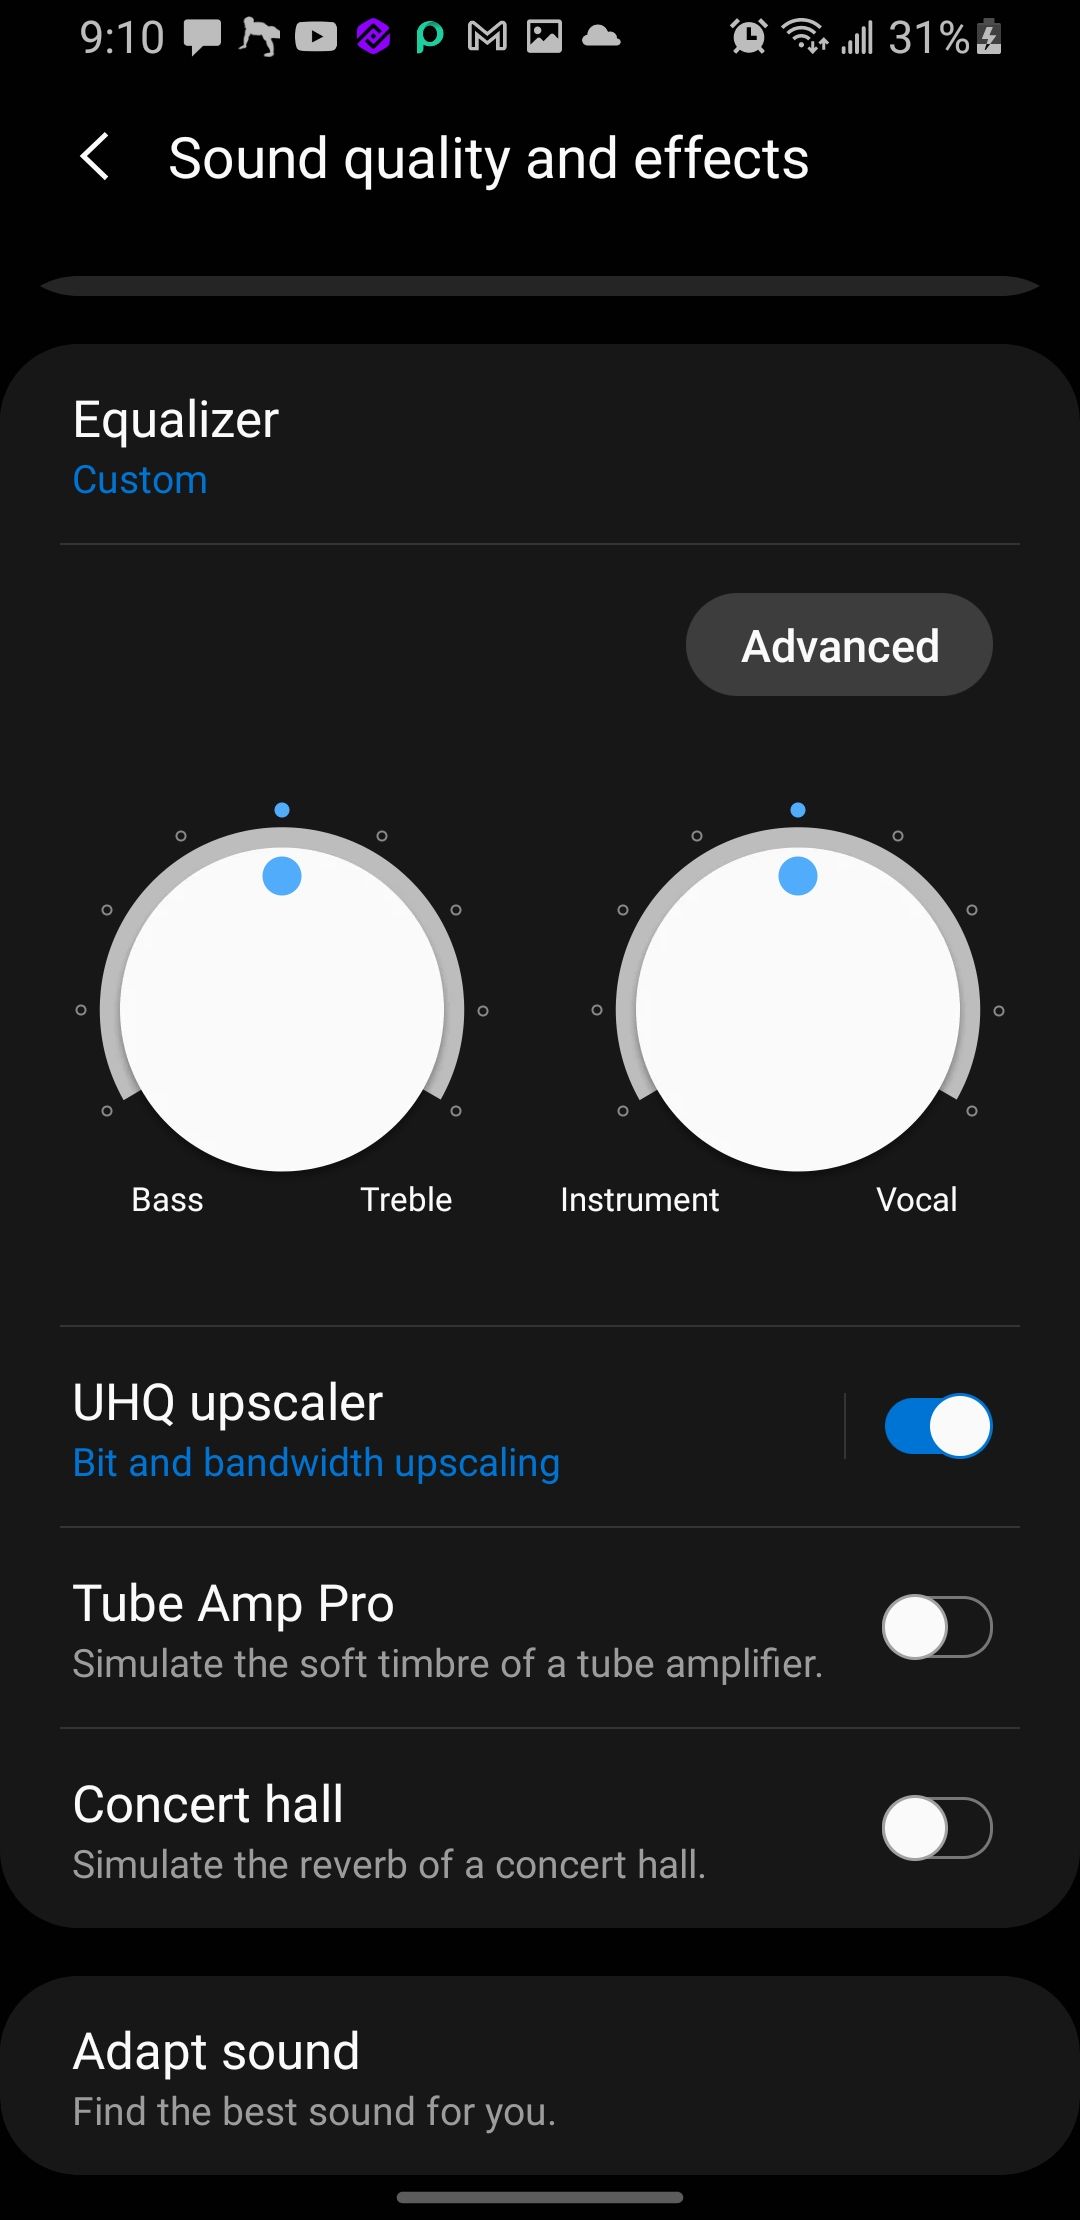 Screenshot of UHQ Upscaler Active When 3.5mm Jack Plugged